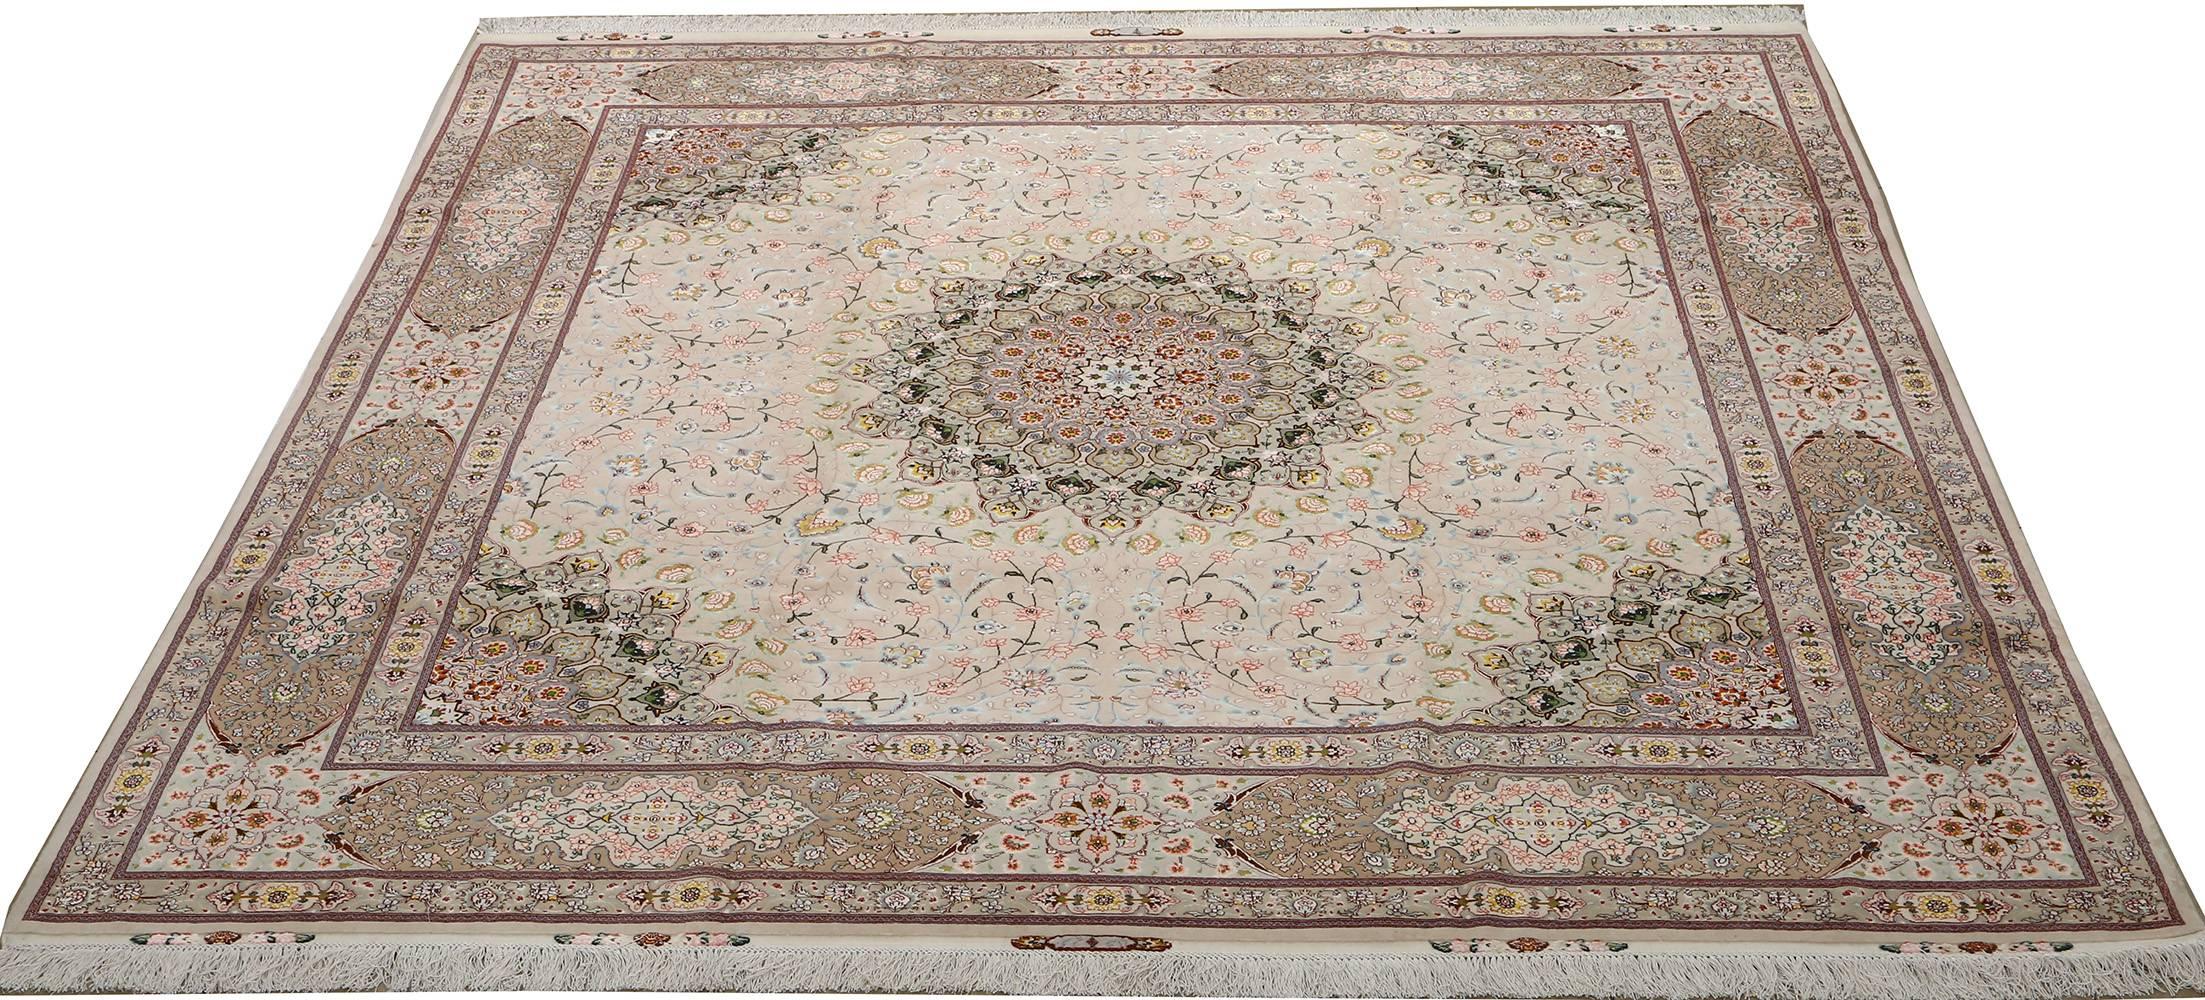 Nazmiyal Collection Vintage Tabriz Persian Rug. Size: 9 ft 8 in x 9 ft 11 in 3